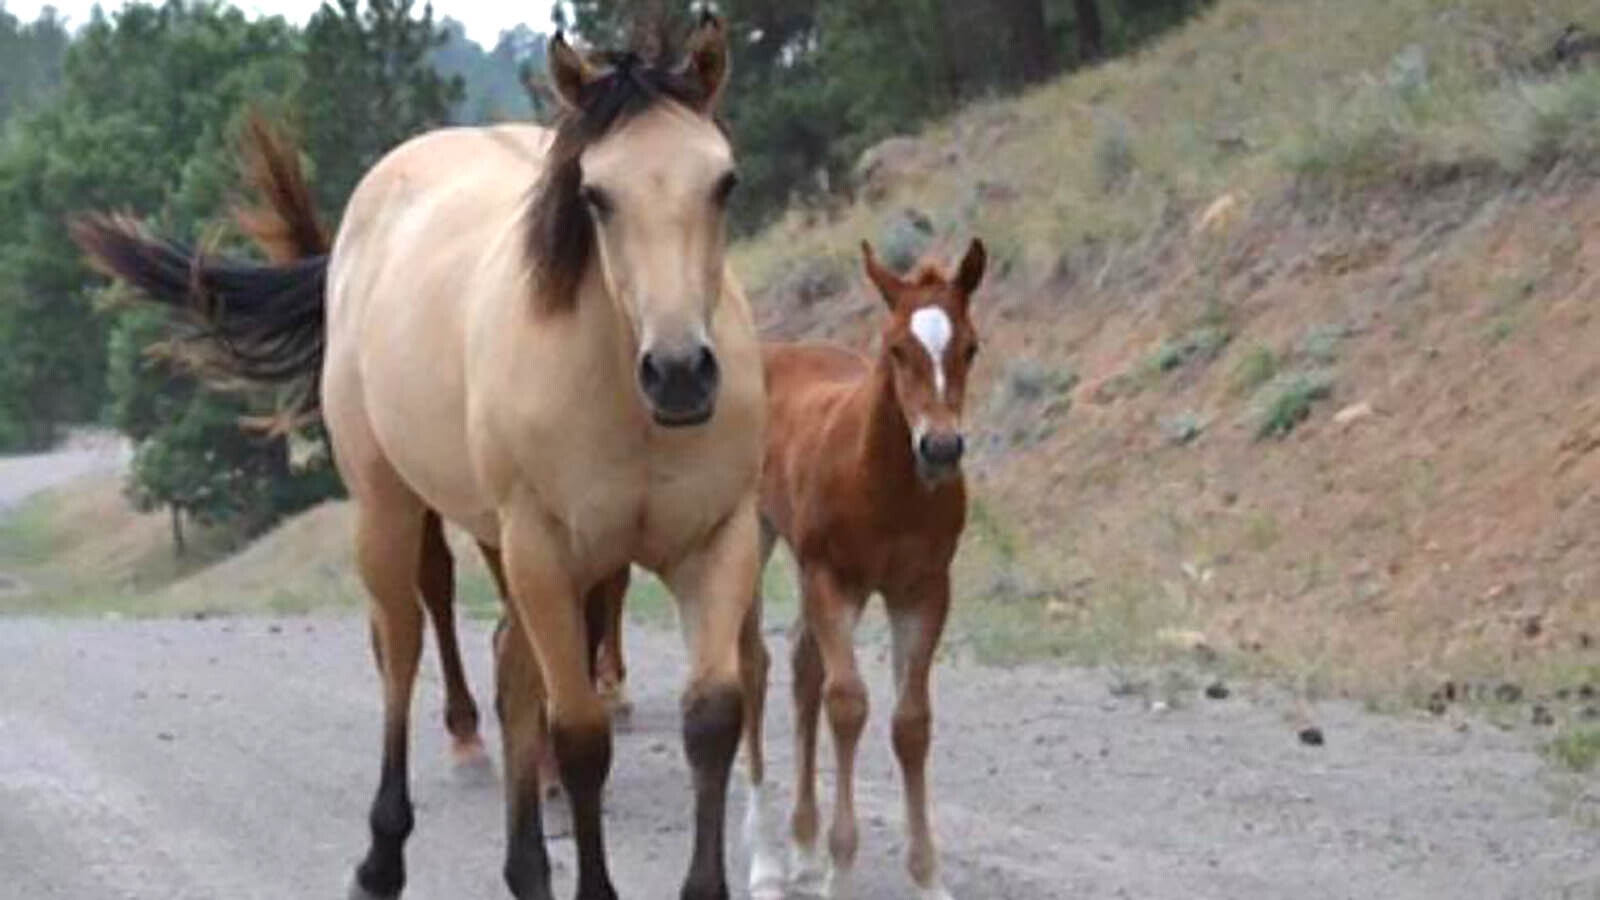 ave Wolfskill's horses often wander the stretch of Barlow Canyon Road that traverses through his family's ranch property where speeding motorists are a concern.